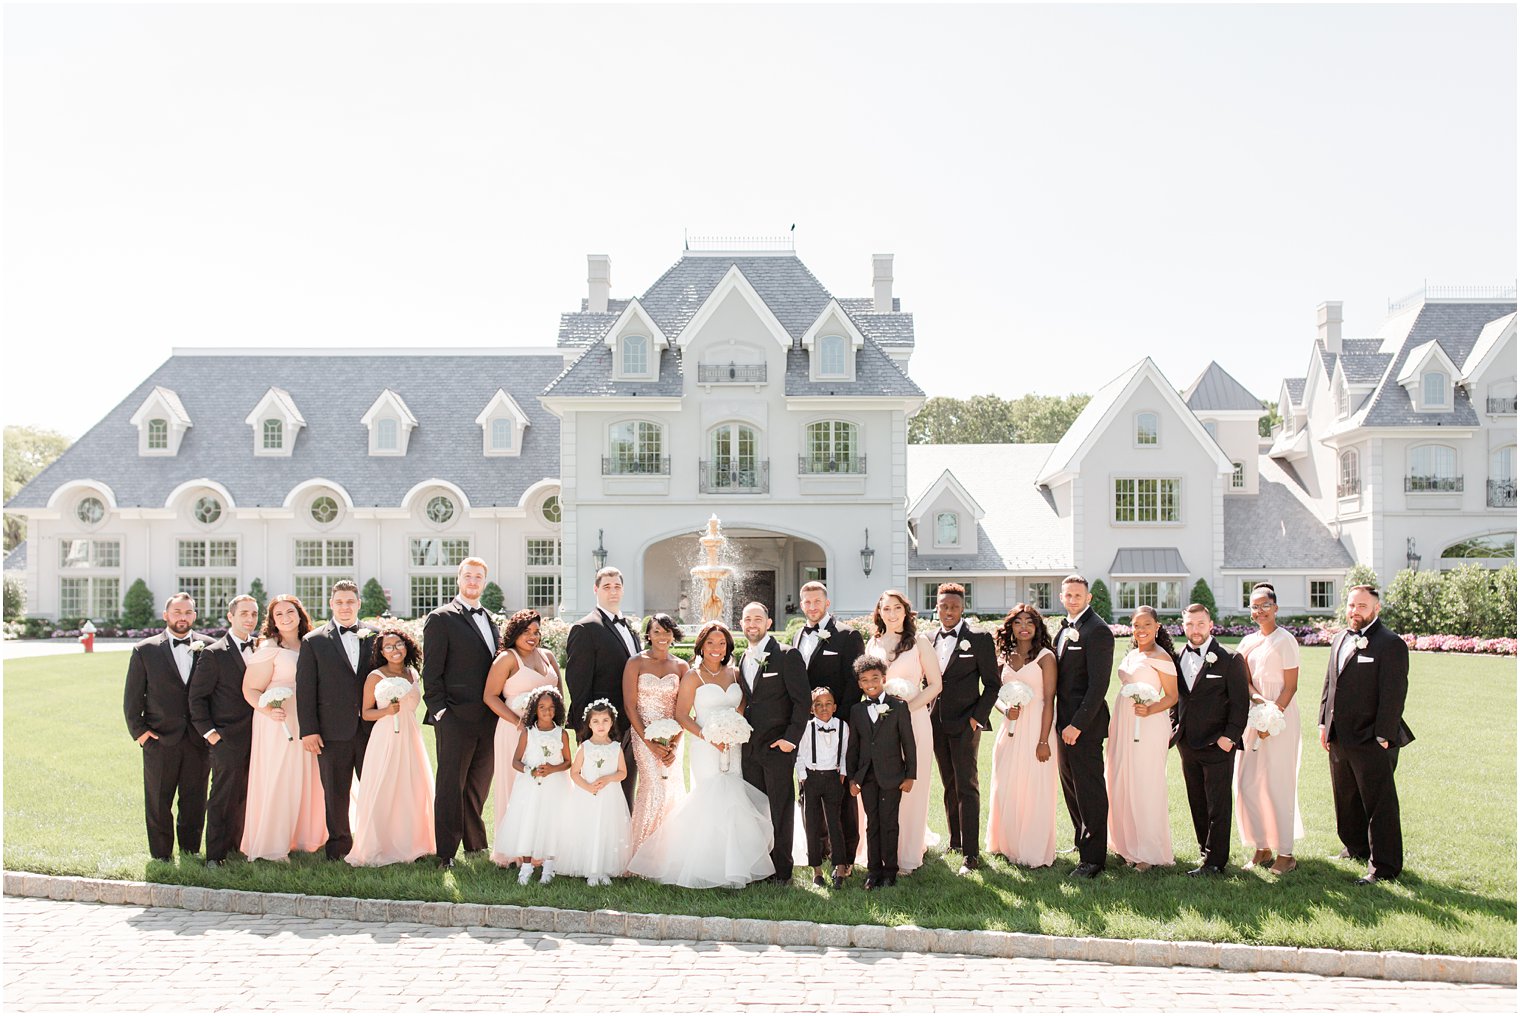 Bridal party photo in front of Park Chateau